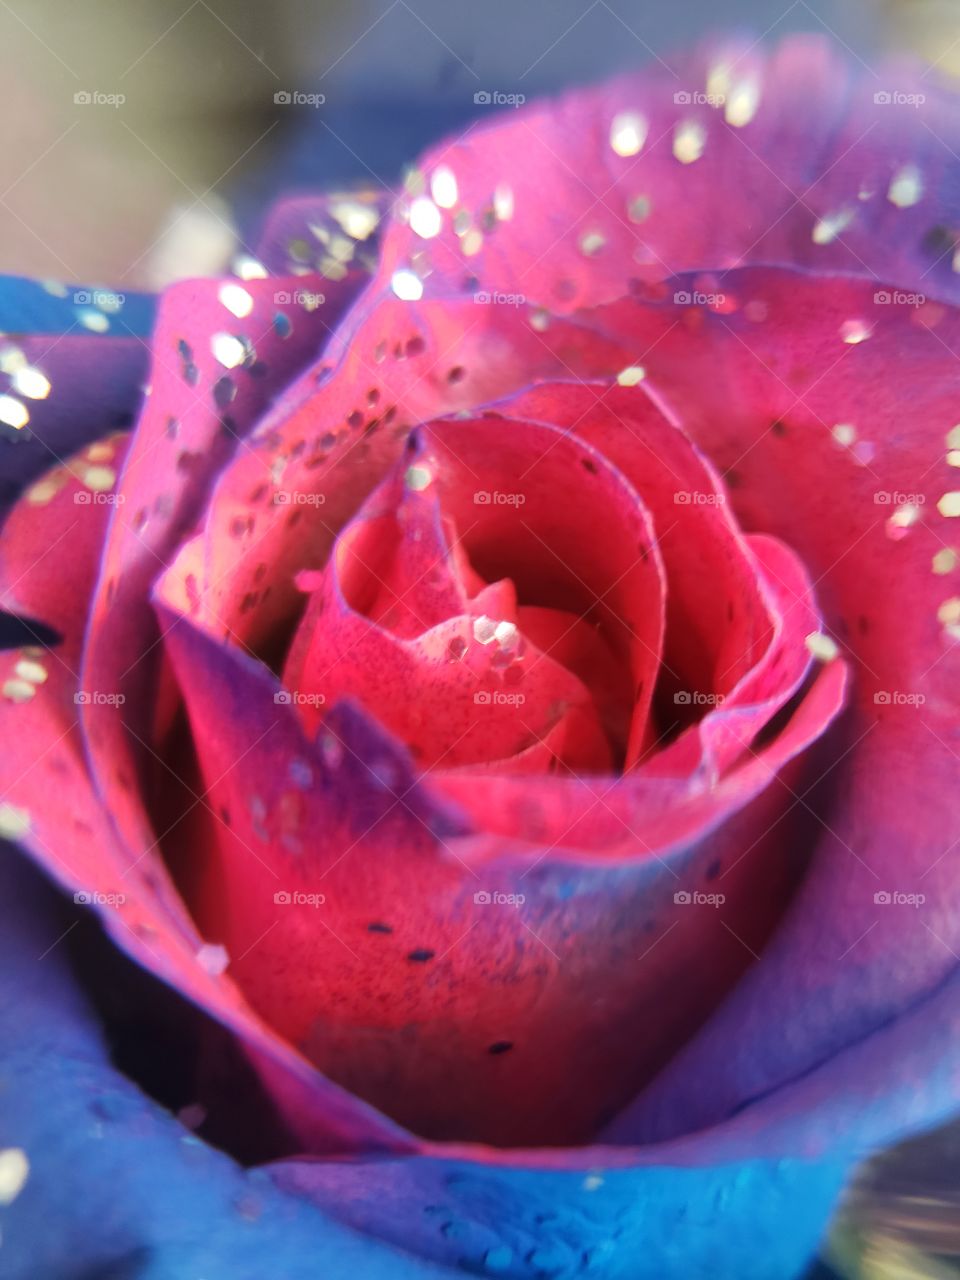 A beautiful and glittery rose, dyed blue and pink.